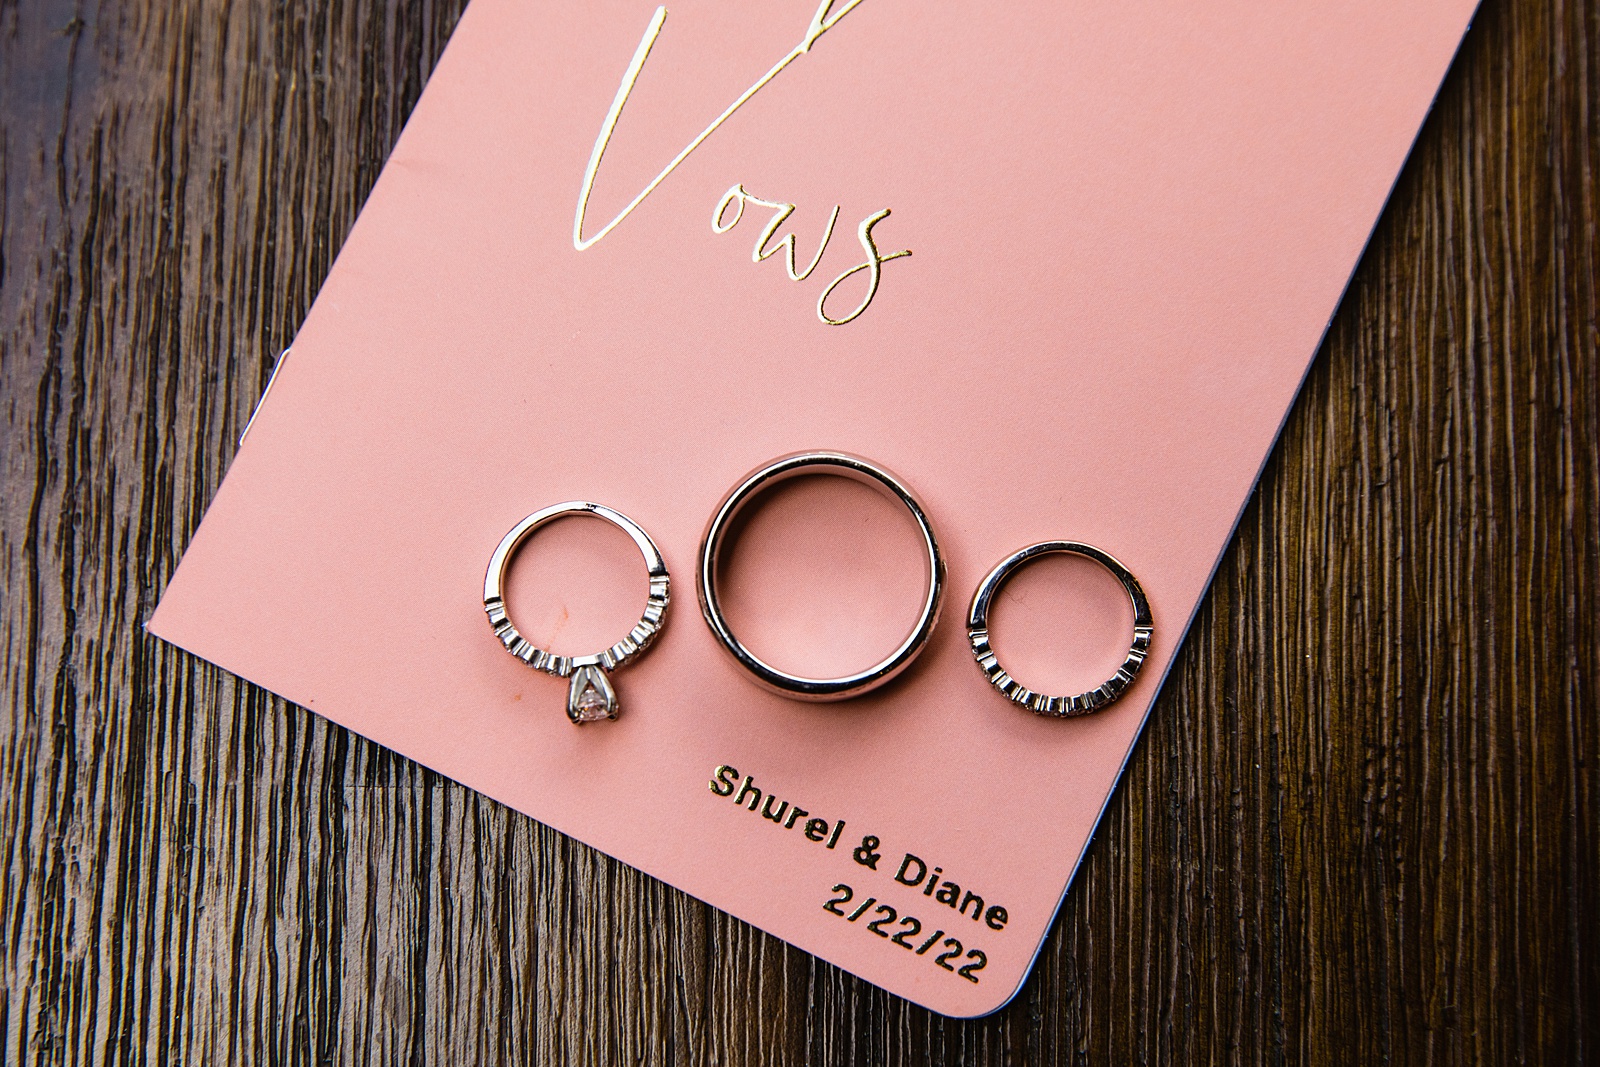 Couple's wedding rings on custom peach vow books by PMA Photography.